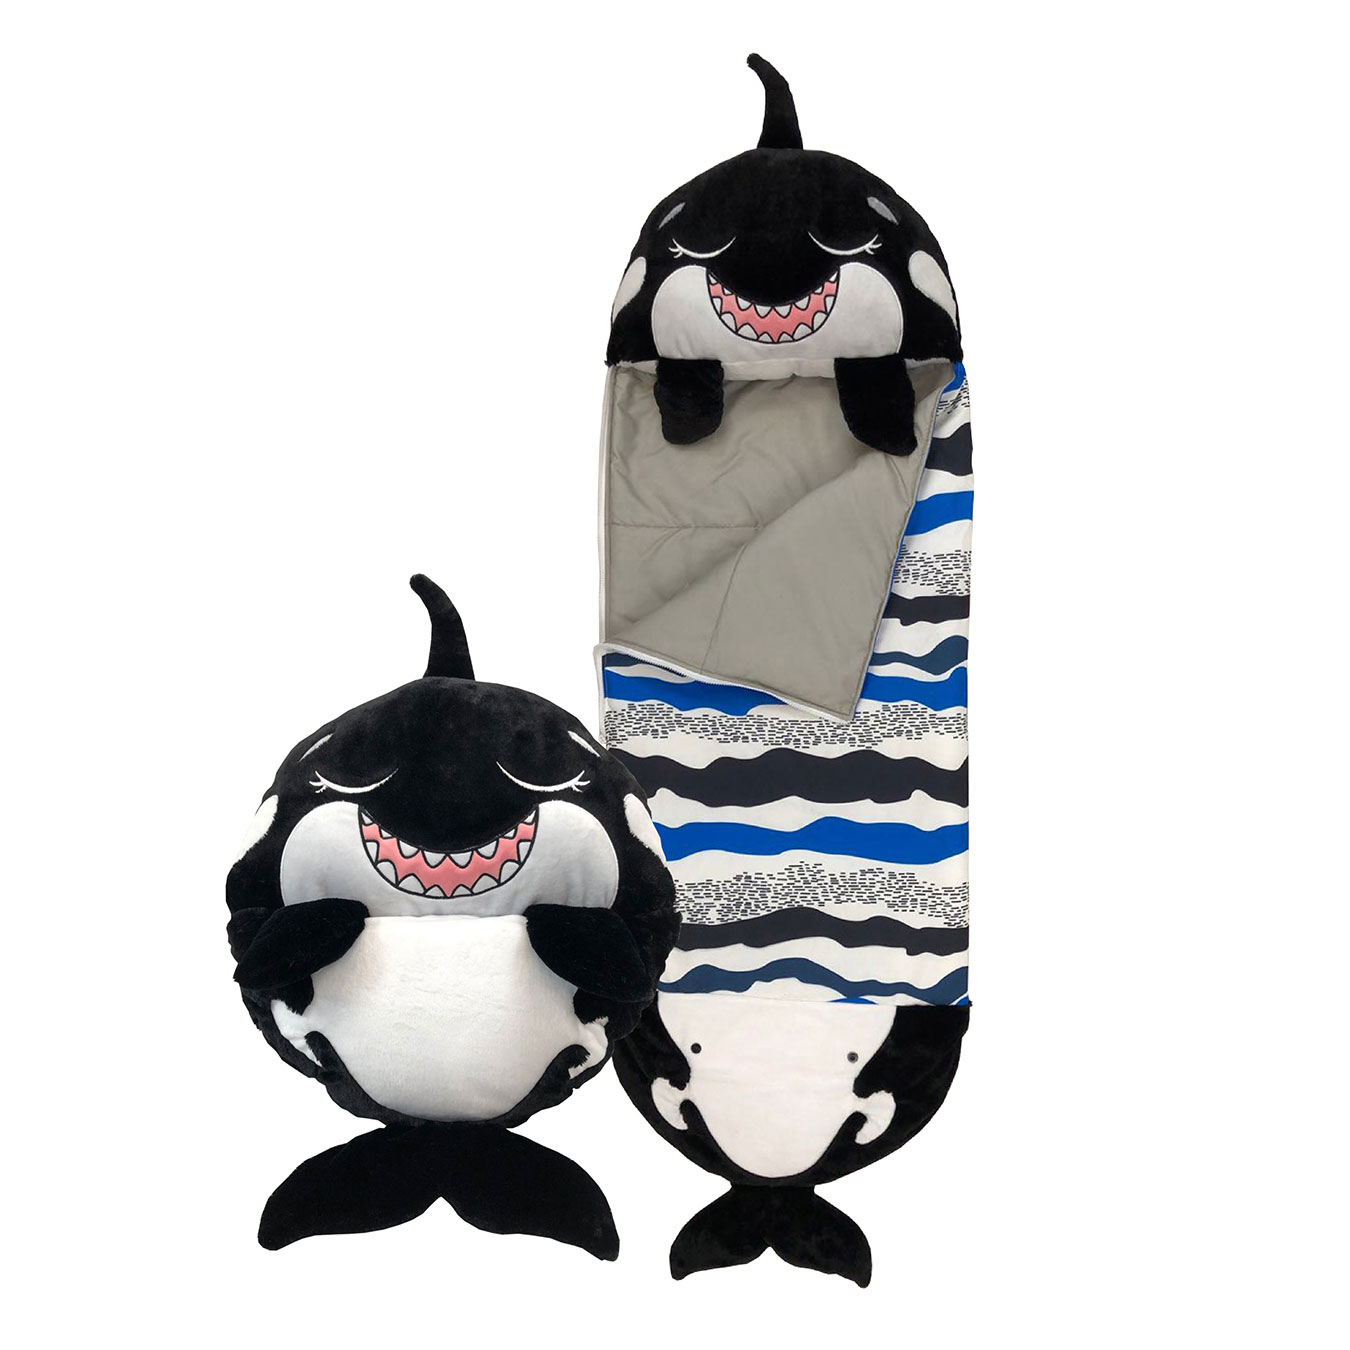 View Happy Nappers Black Shark Medium Ages 3 to 6 Plush Toy That Opens To A Fun Sleeping Bag High Street TV information